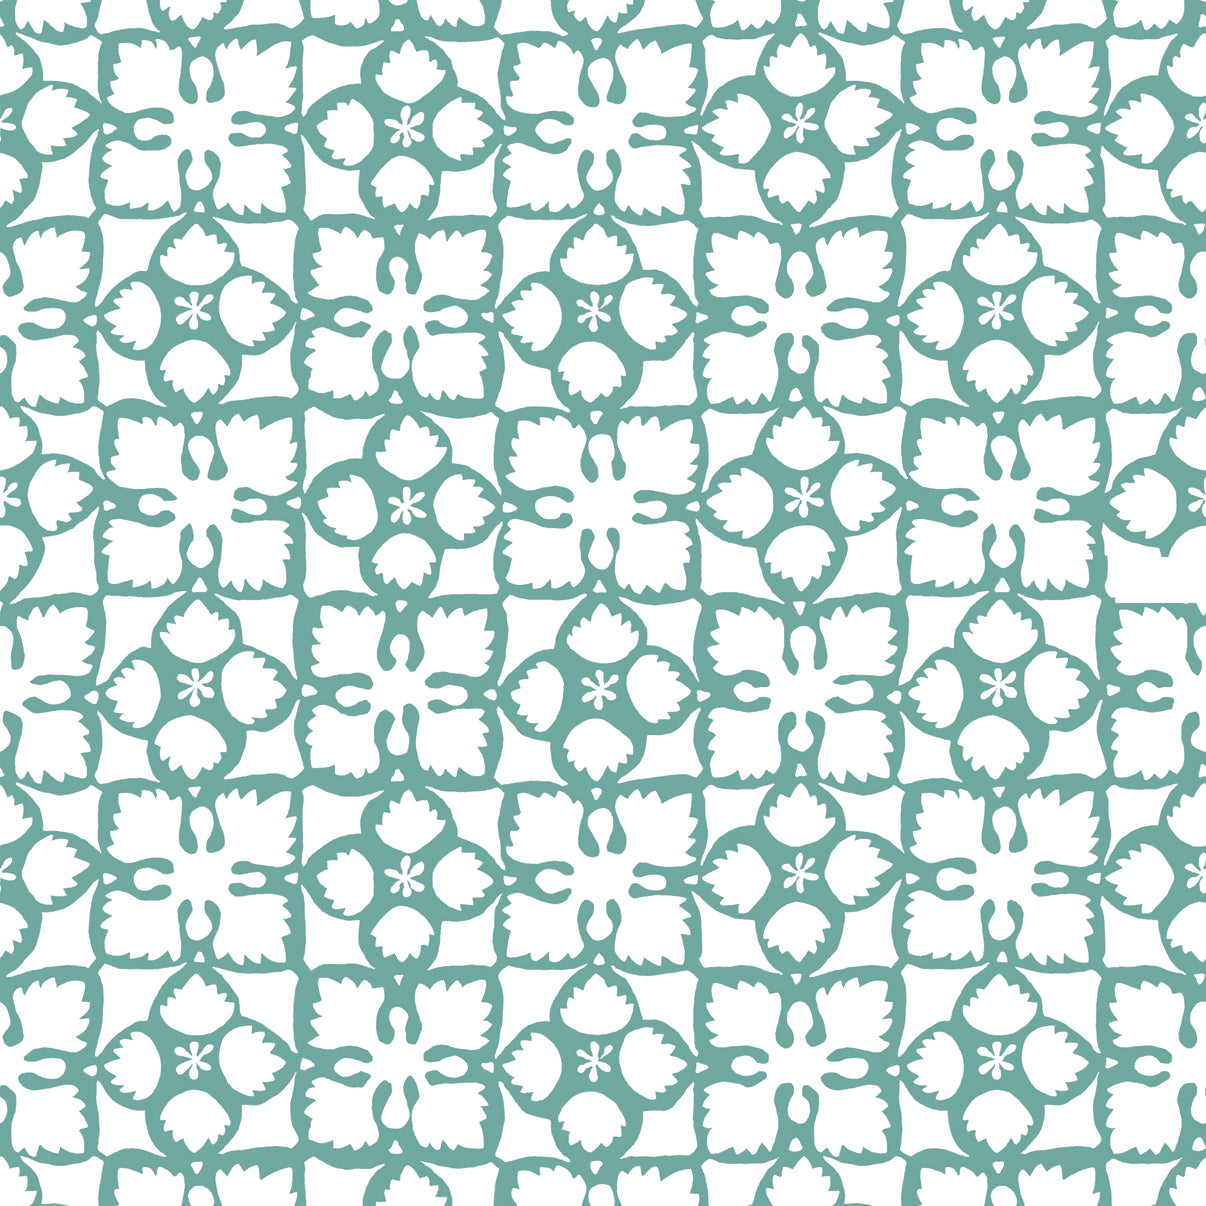 Detail of wallpaper in a botanical lattice print in teal on a white field.